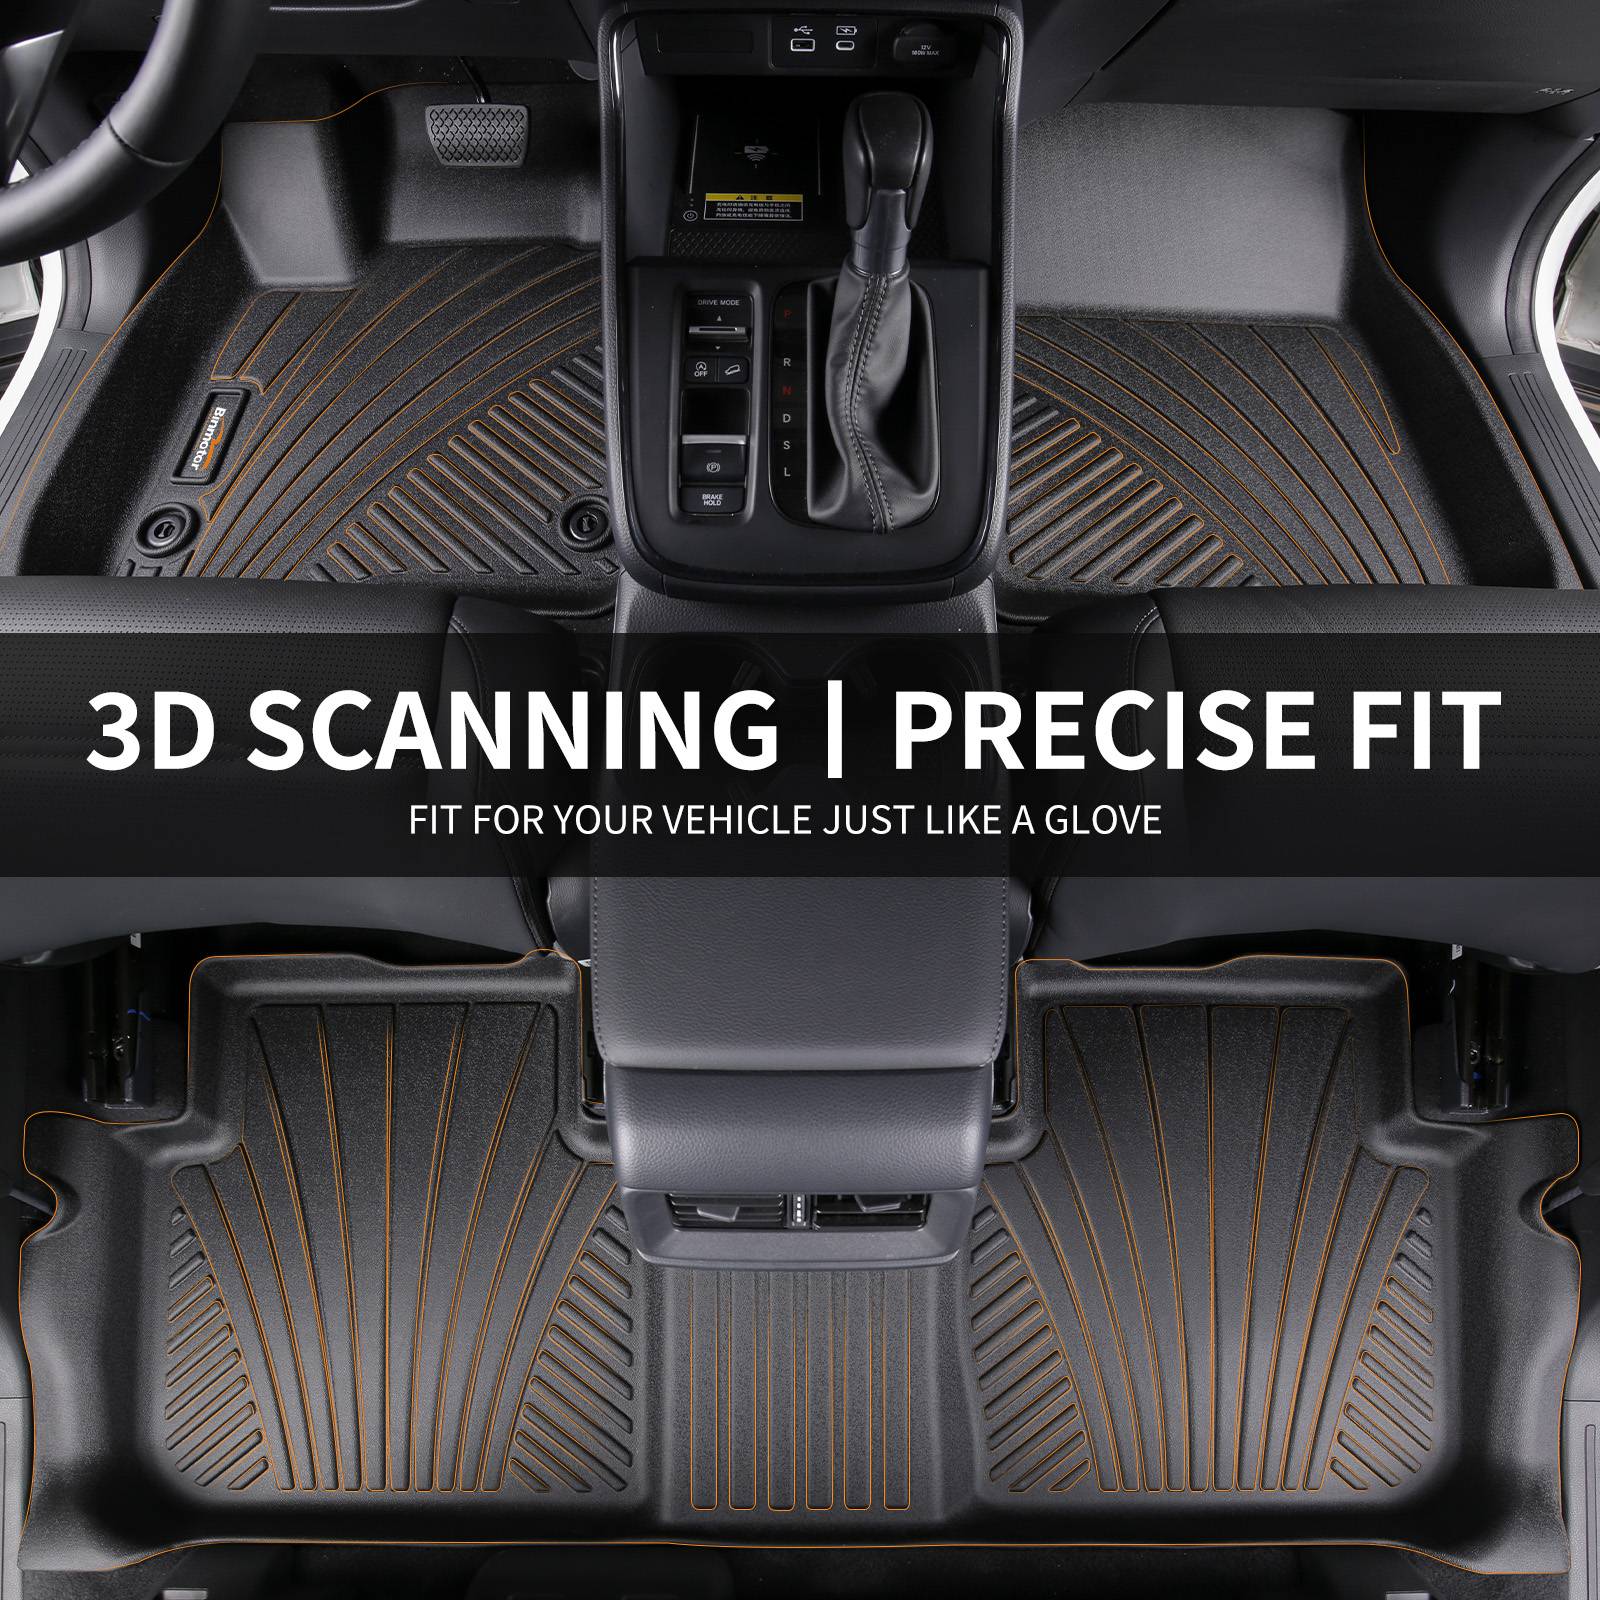 Binmotor-Floor Mats All Weather Floor Mats for Hyundai Ioniq 5 Unmovable Console(Fixed Center Console), 1st & 2nd Row Full Set, Heavy Duty Car Floor Liners-Black IONIQ 5 Accessories（compatible year 2022-2024）